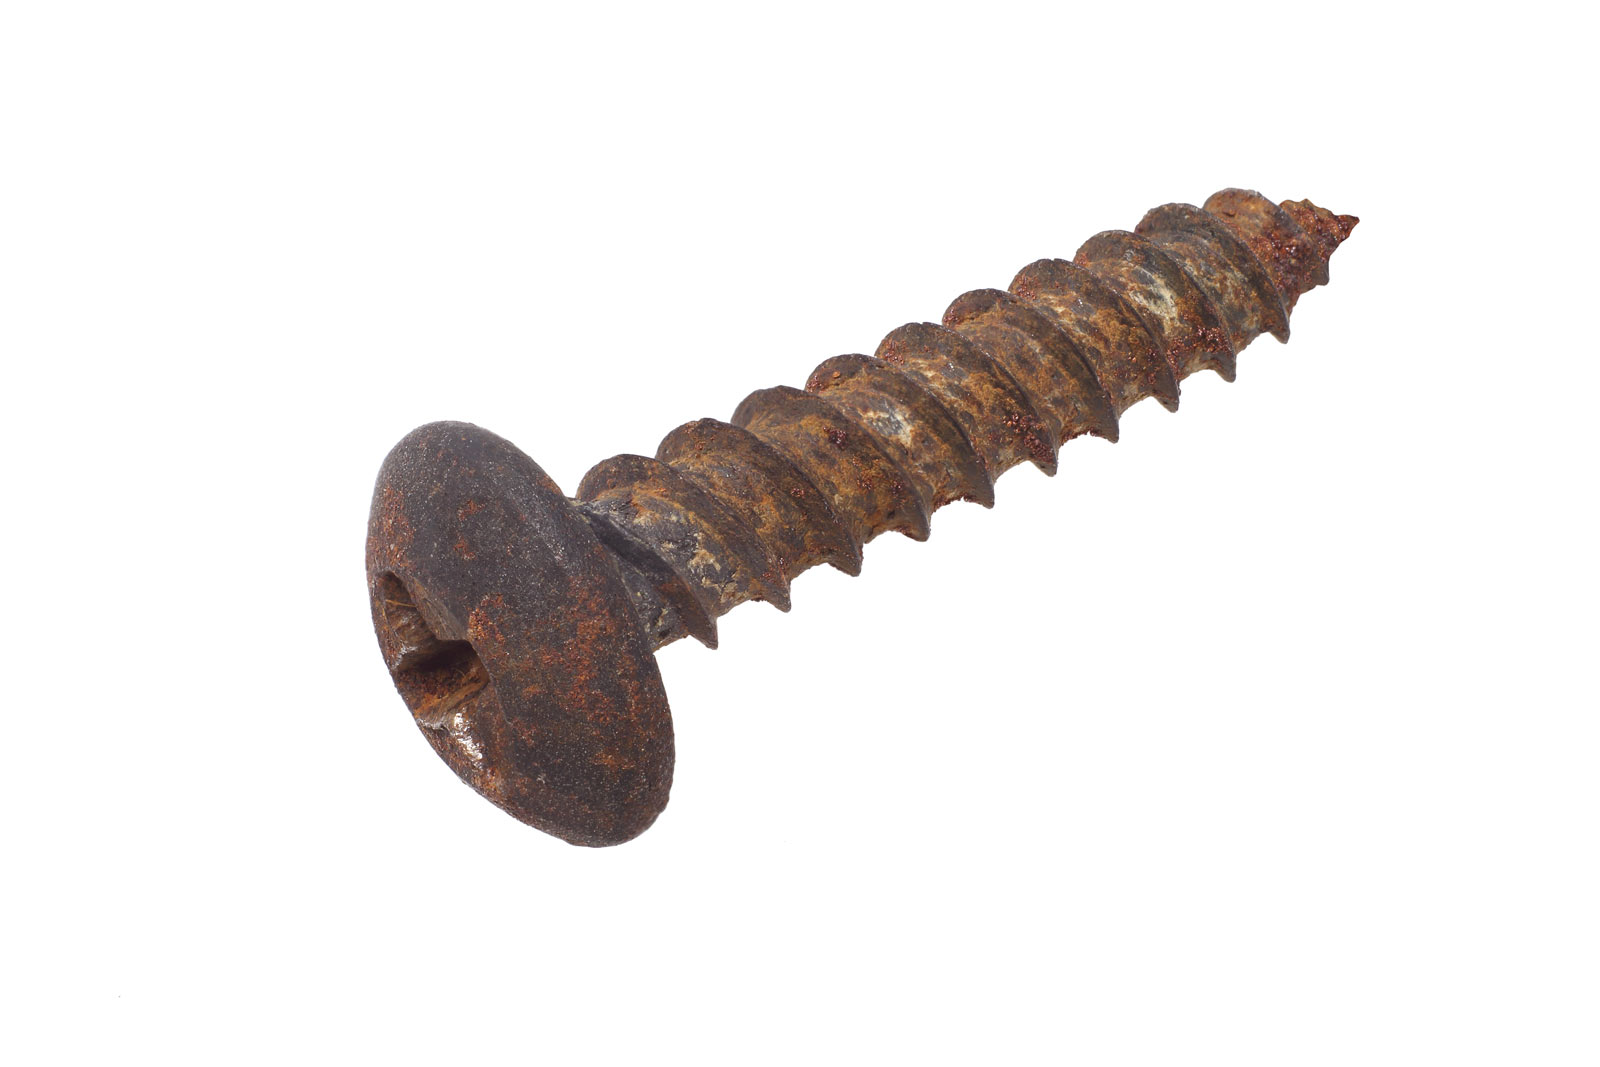 Save Time and Frustration: Discover the Game-Changing Trick to Remove Broken or Rusted Screws Effortlessly